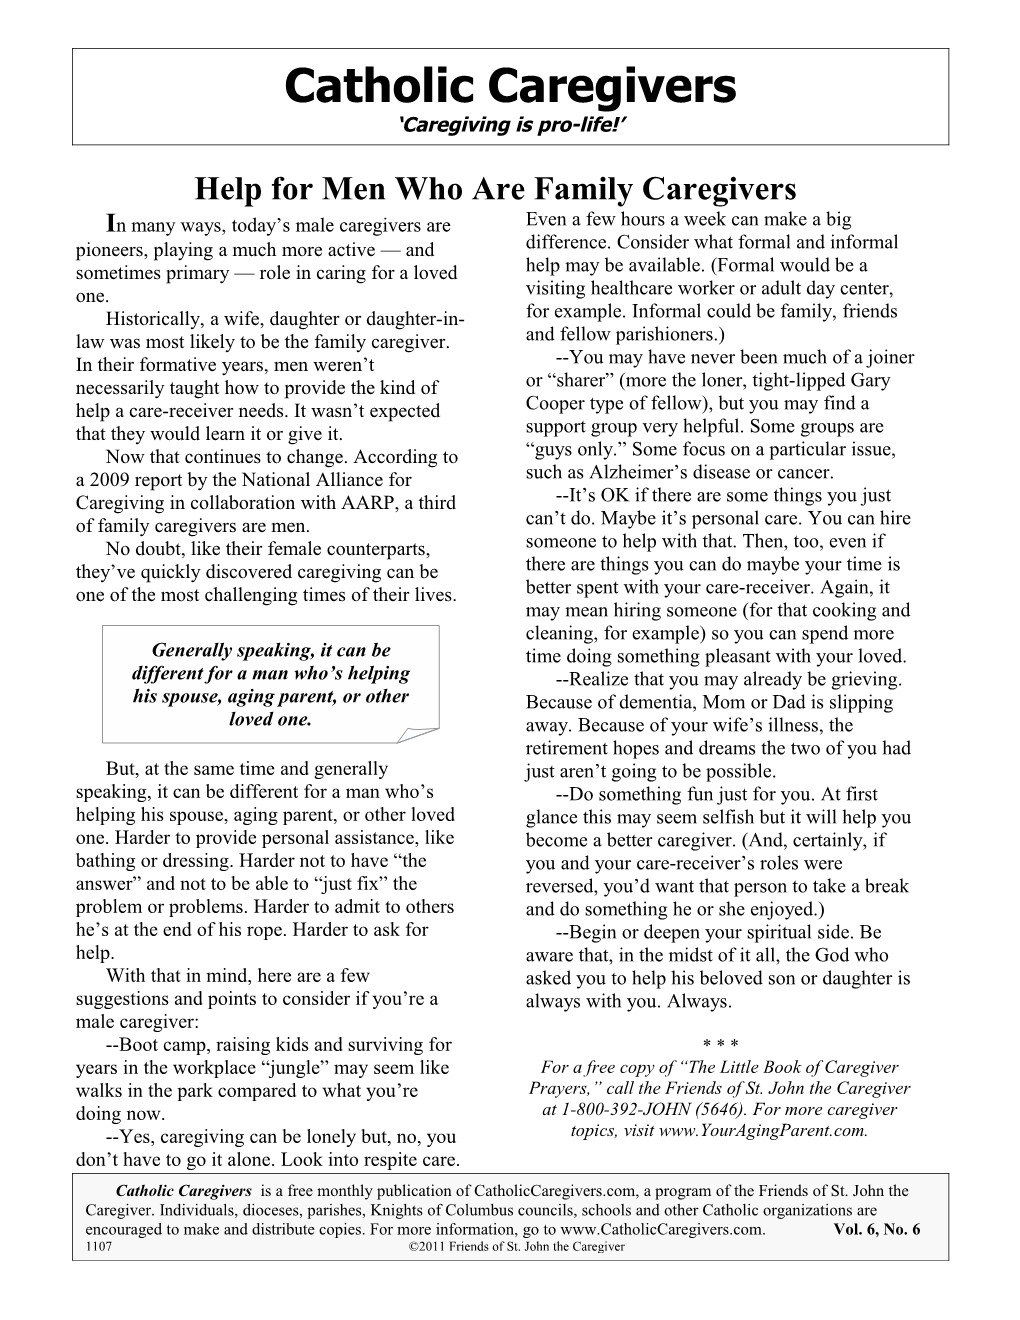 Help for Men Who Are Family Caregivers